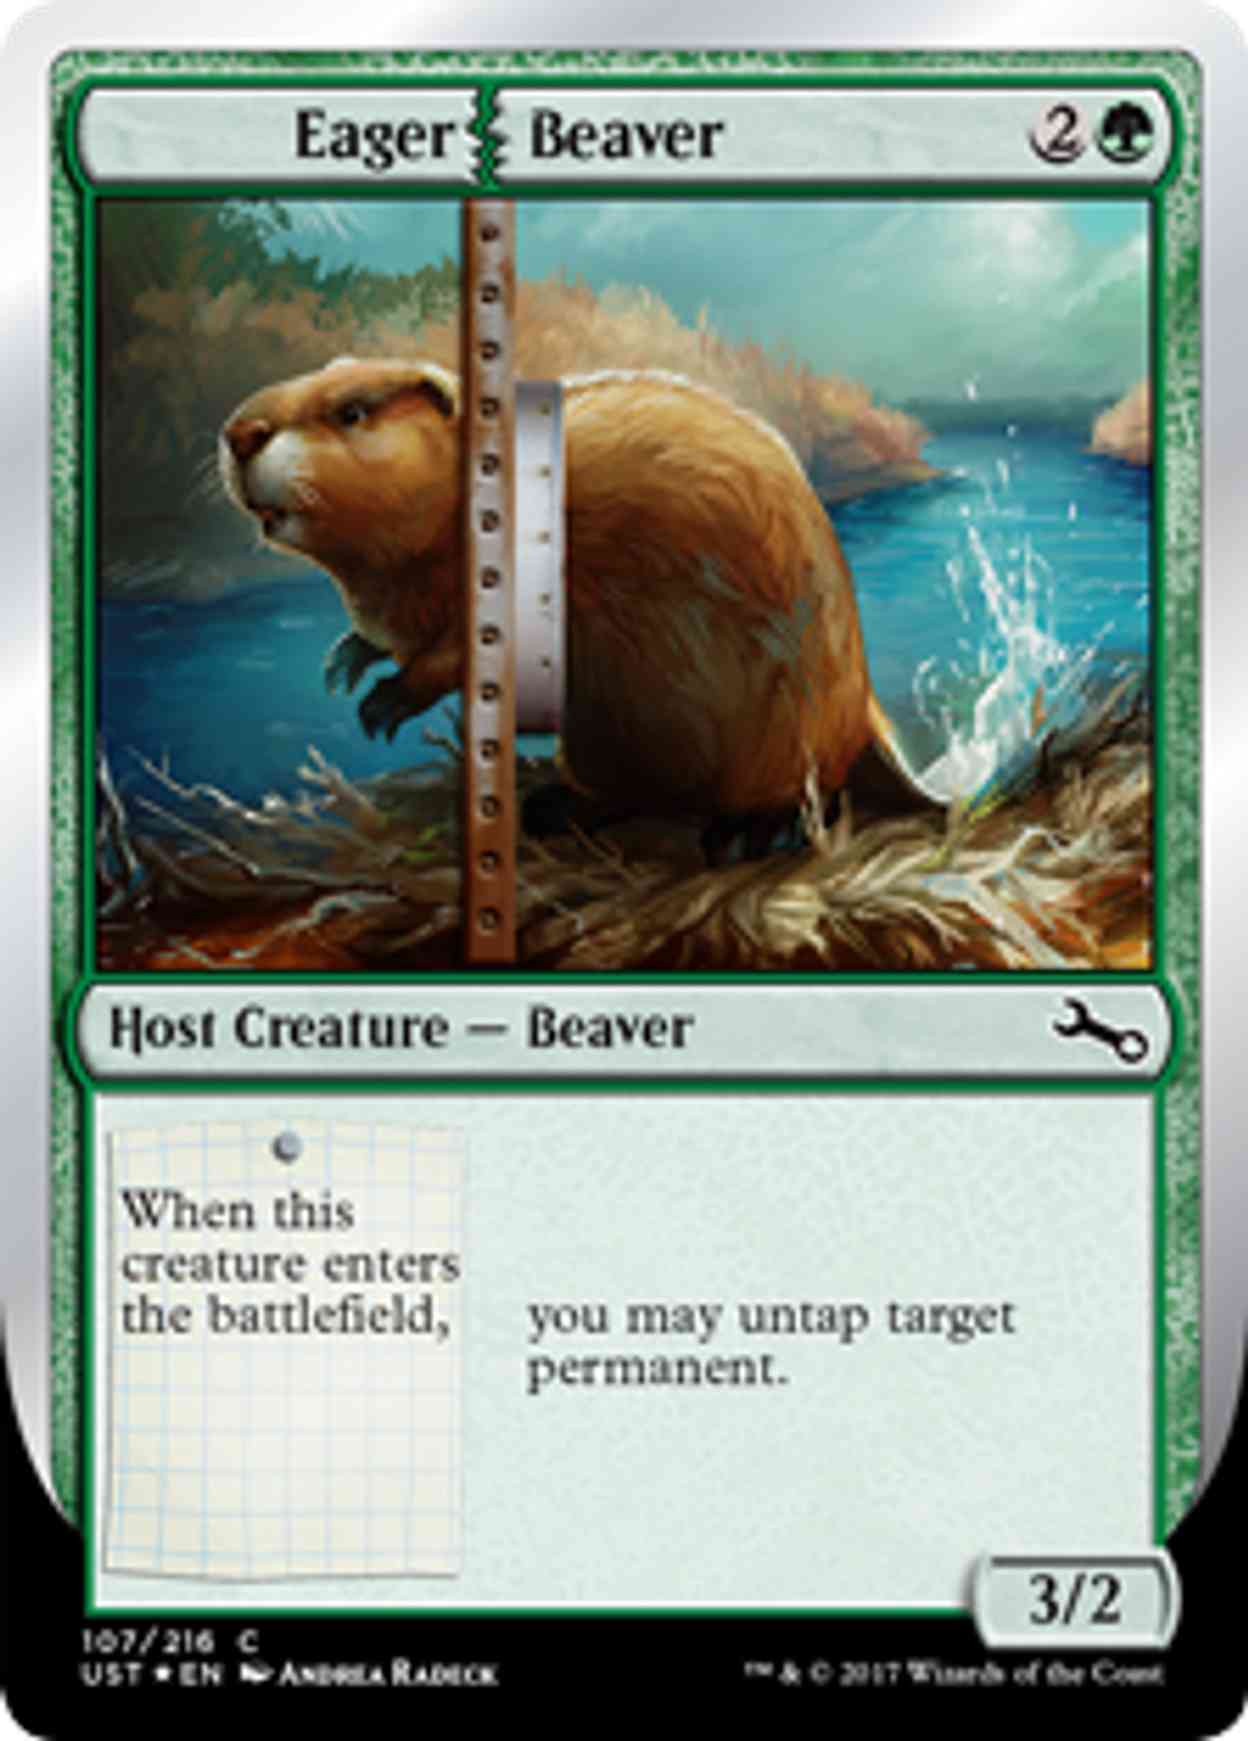 Eager Beaver magic card front